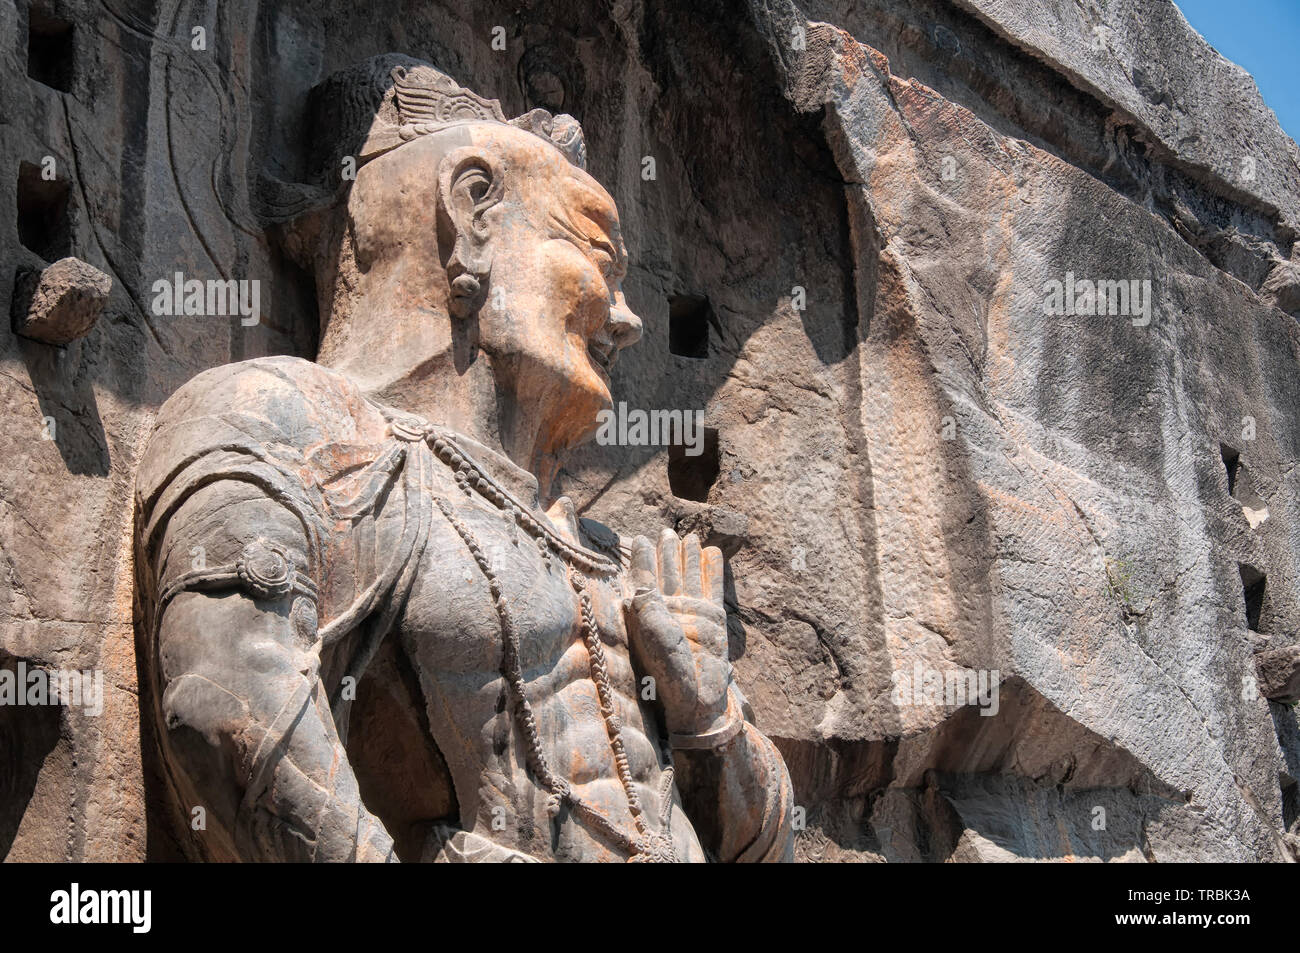 A large bodhisattvas stone statue Fengxiansi cave at Longmen grottoes in Luoyang China Henan province. Stock Photo